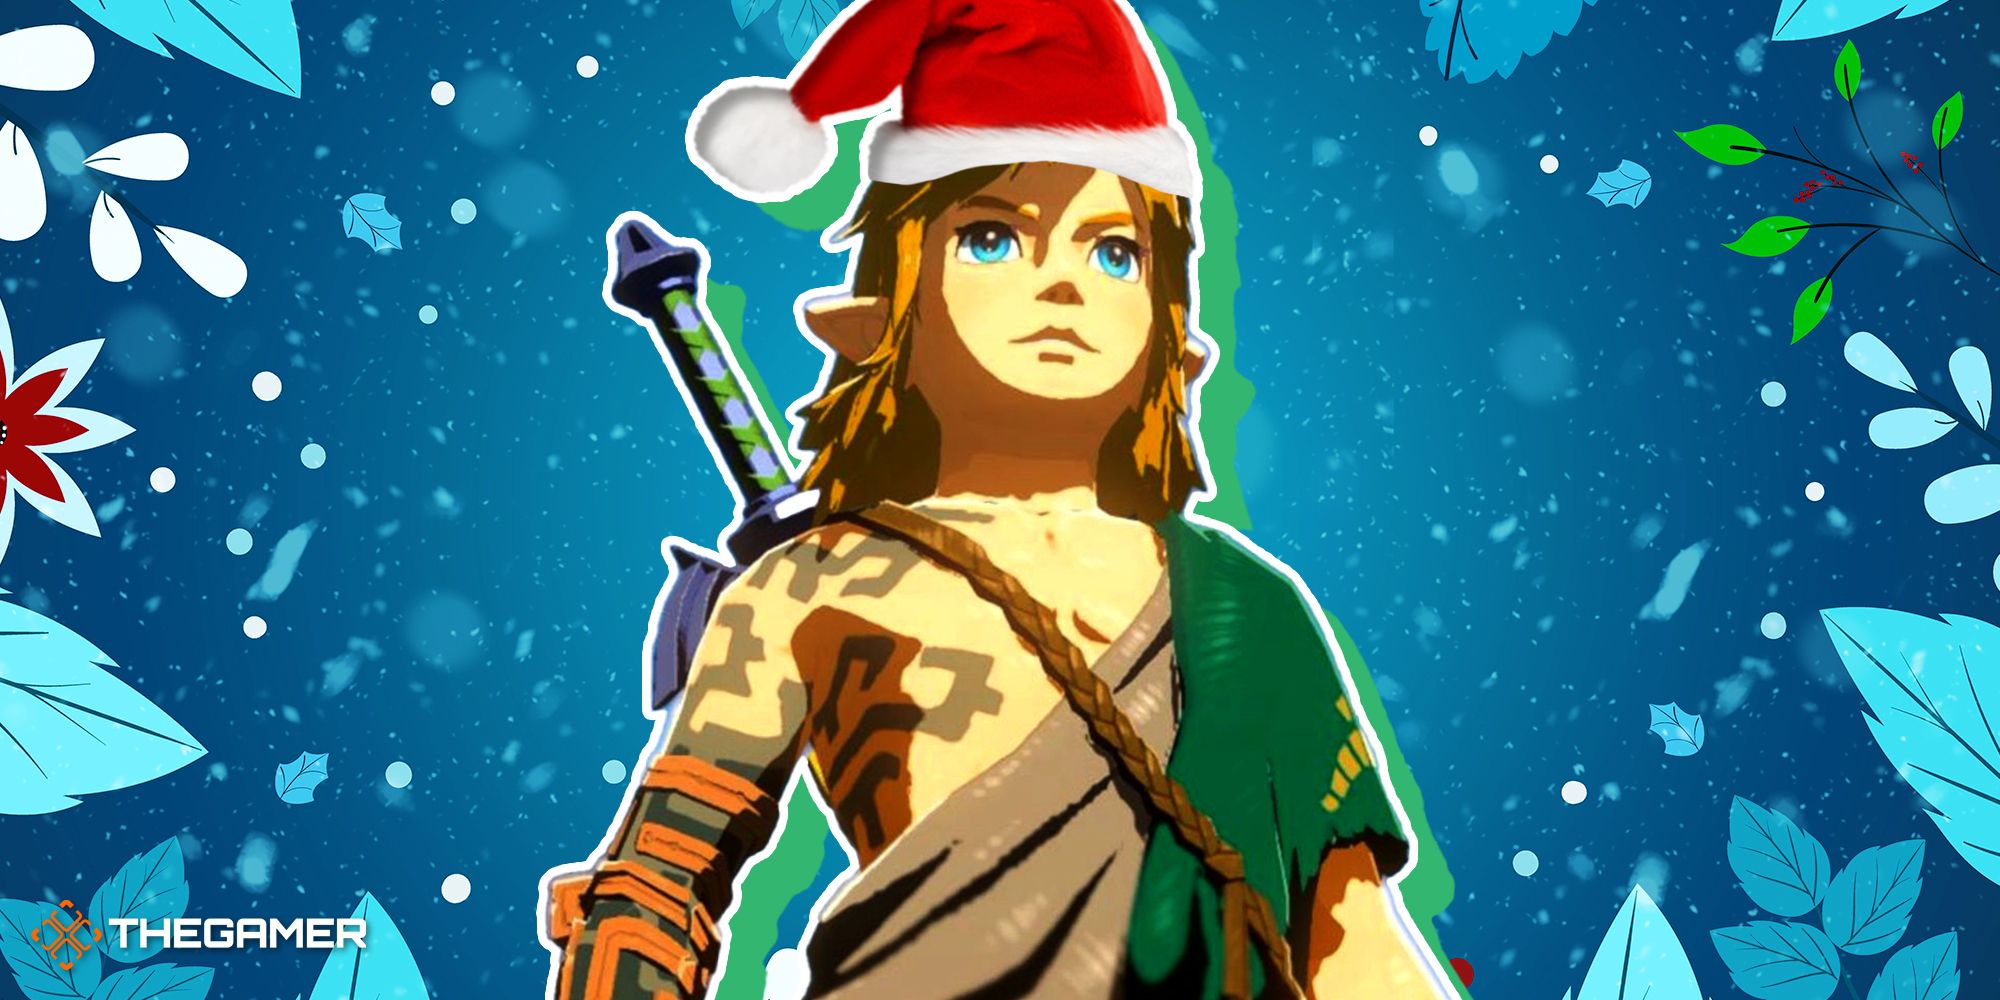 Link from Tears of the Kingdom wearing a Santa Claus hat with a festive holiday background behind him